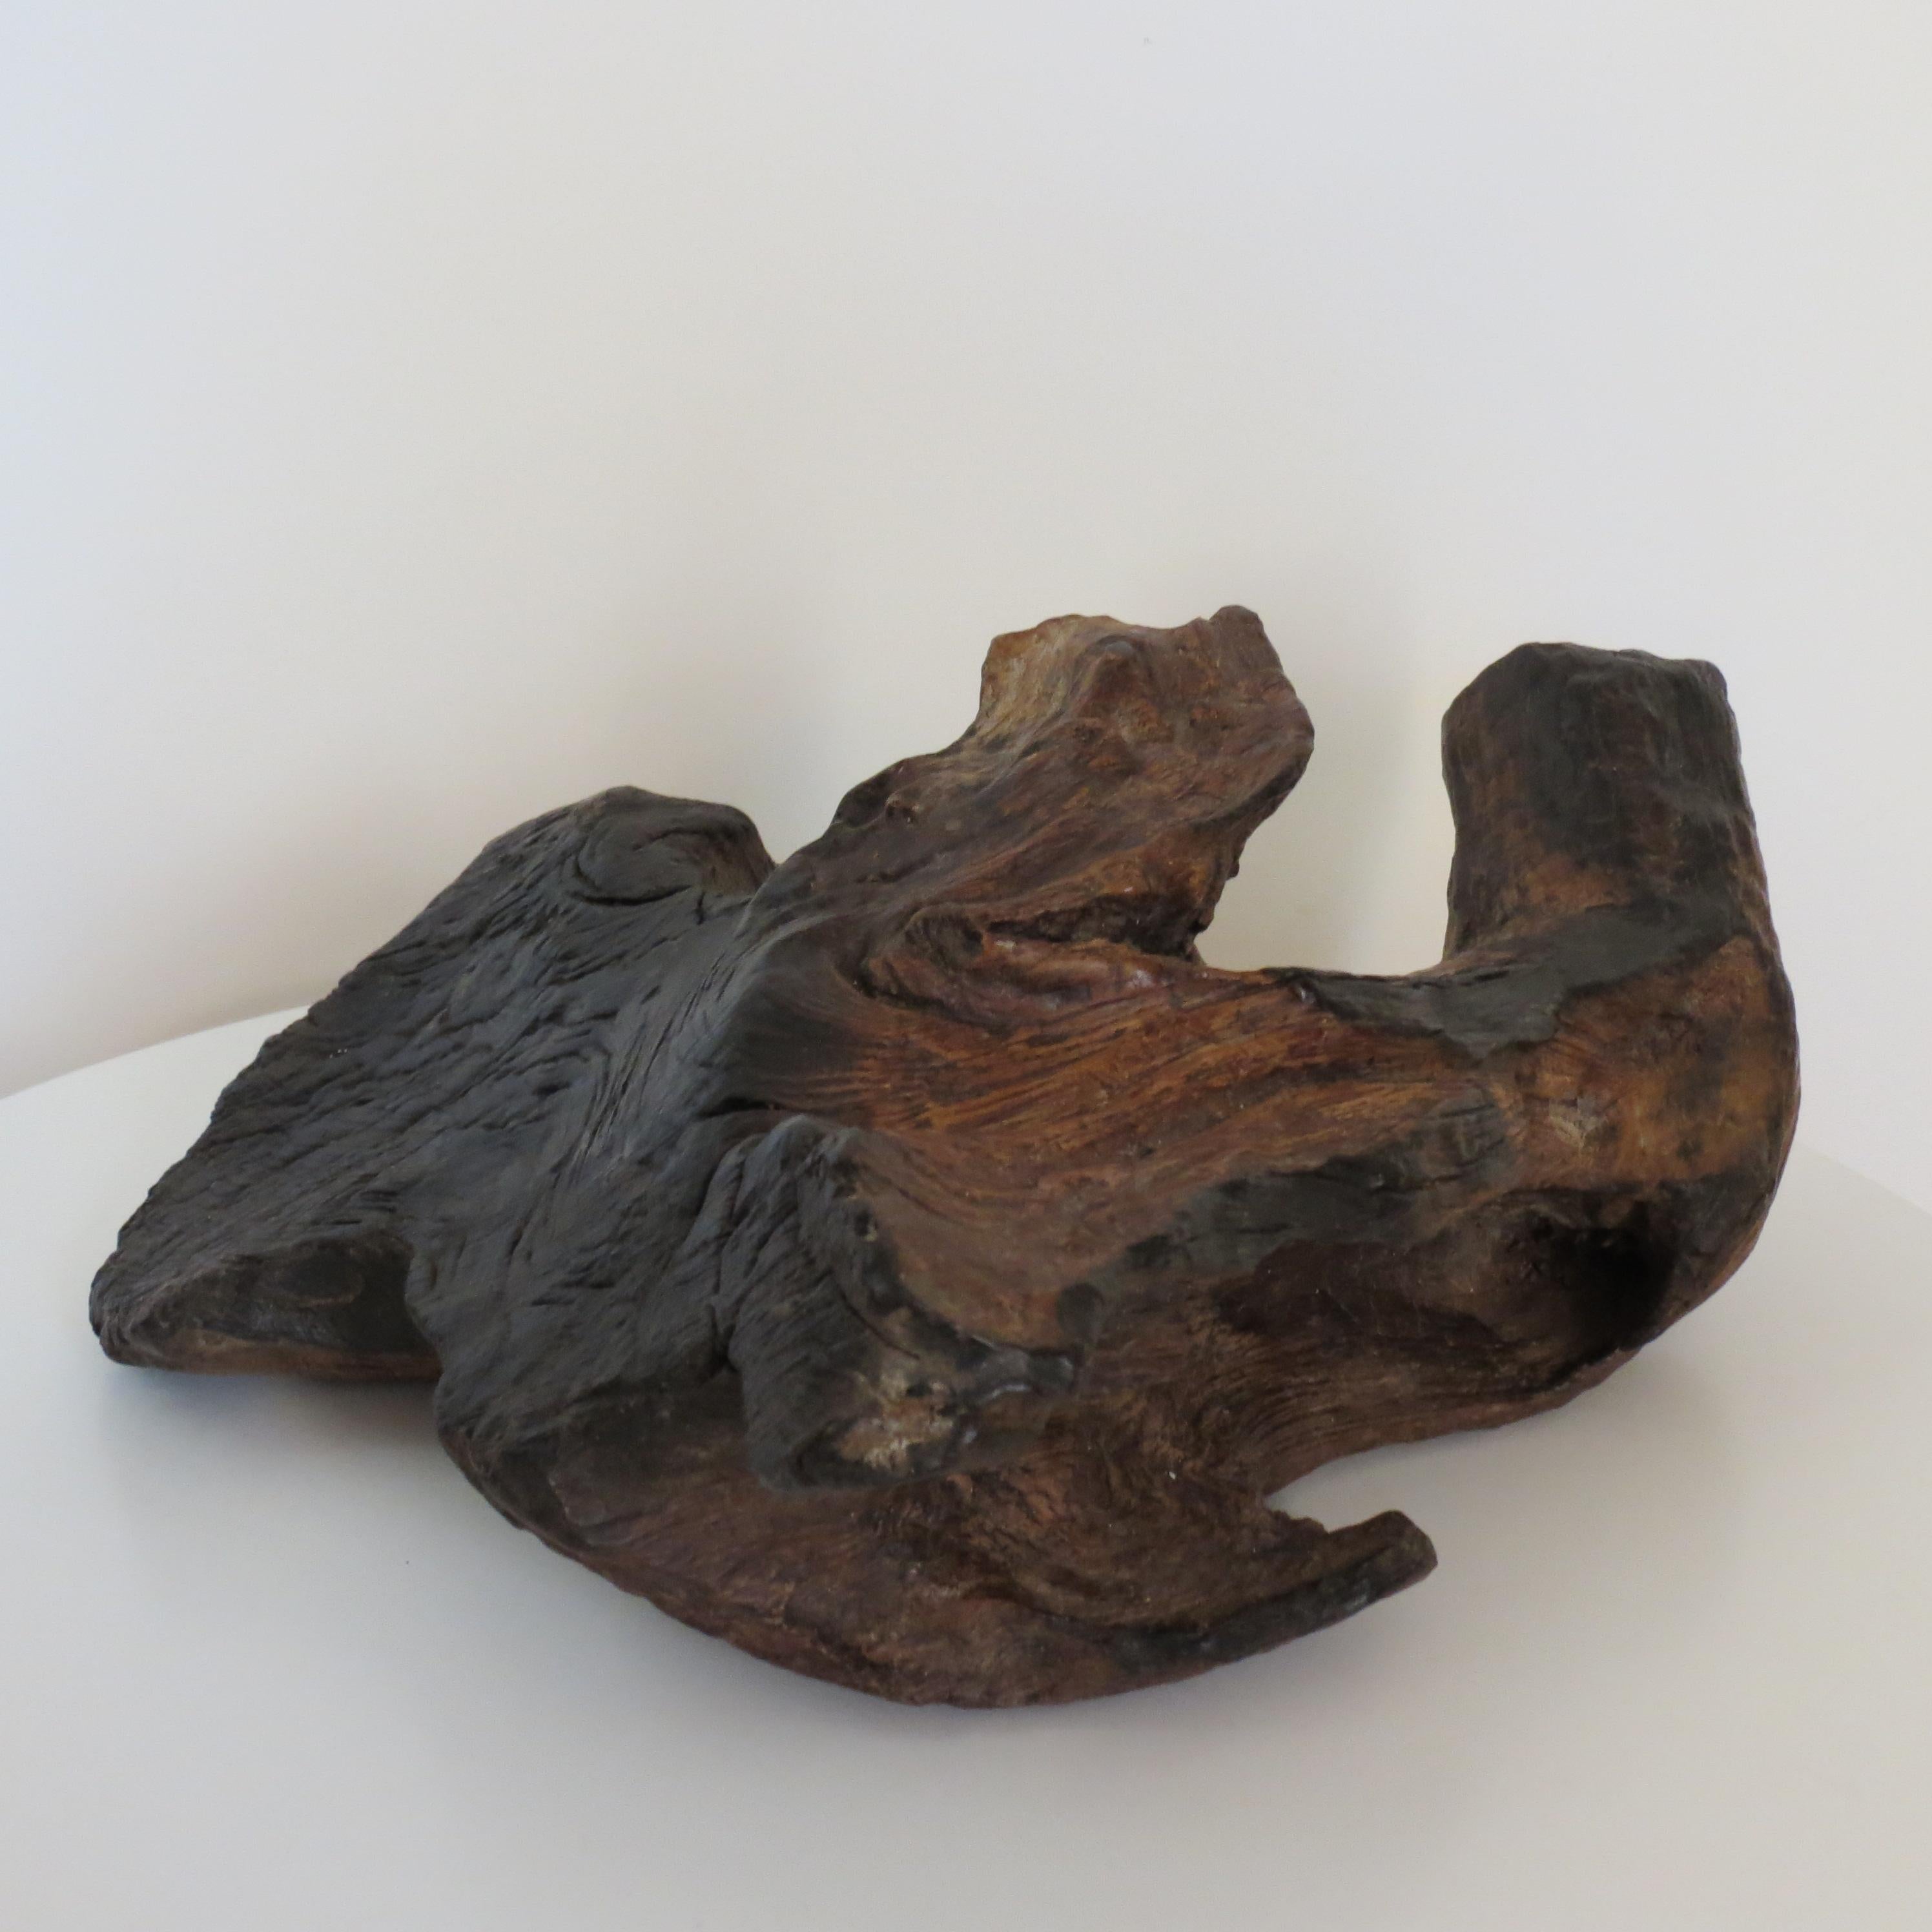 Very nice organic wood sculpture of natural form, areas of the wood are charred. Wonderful texture to the piece.

ST1536
 